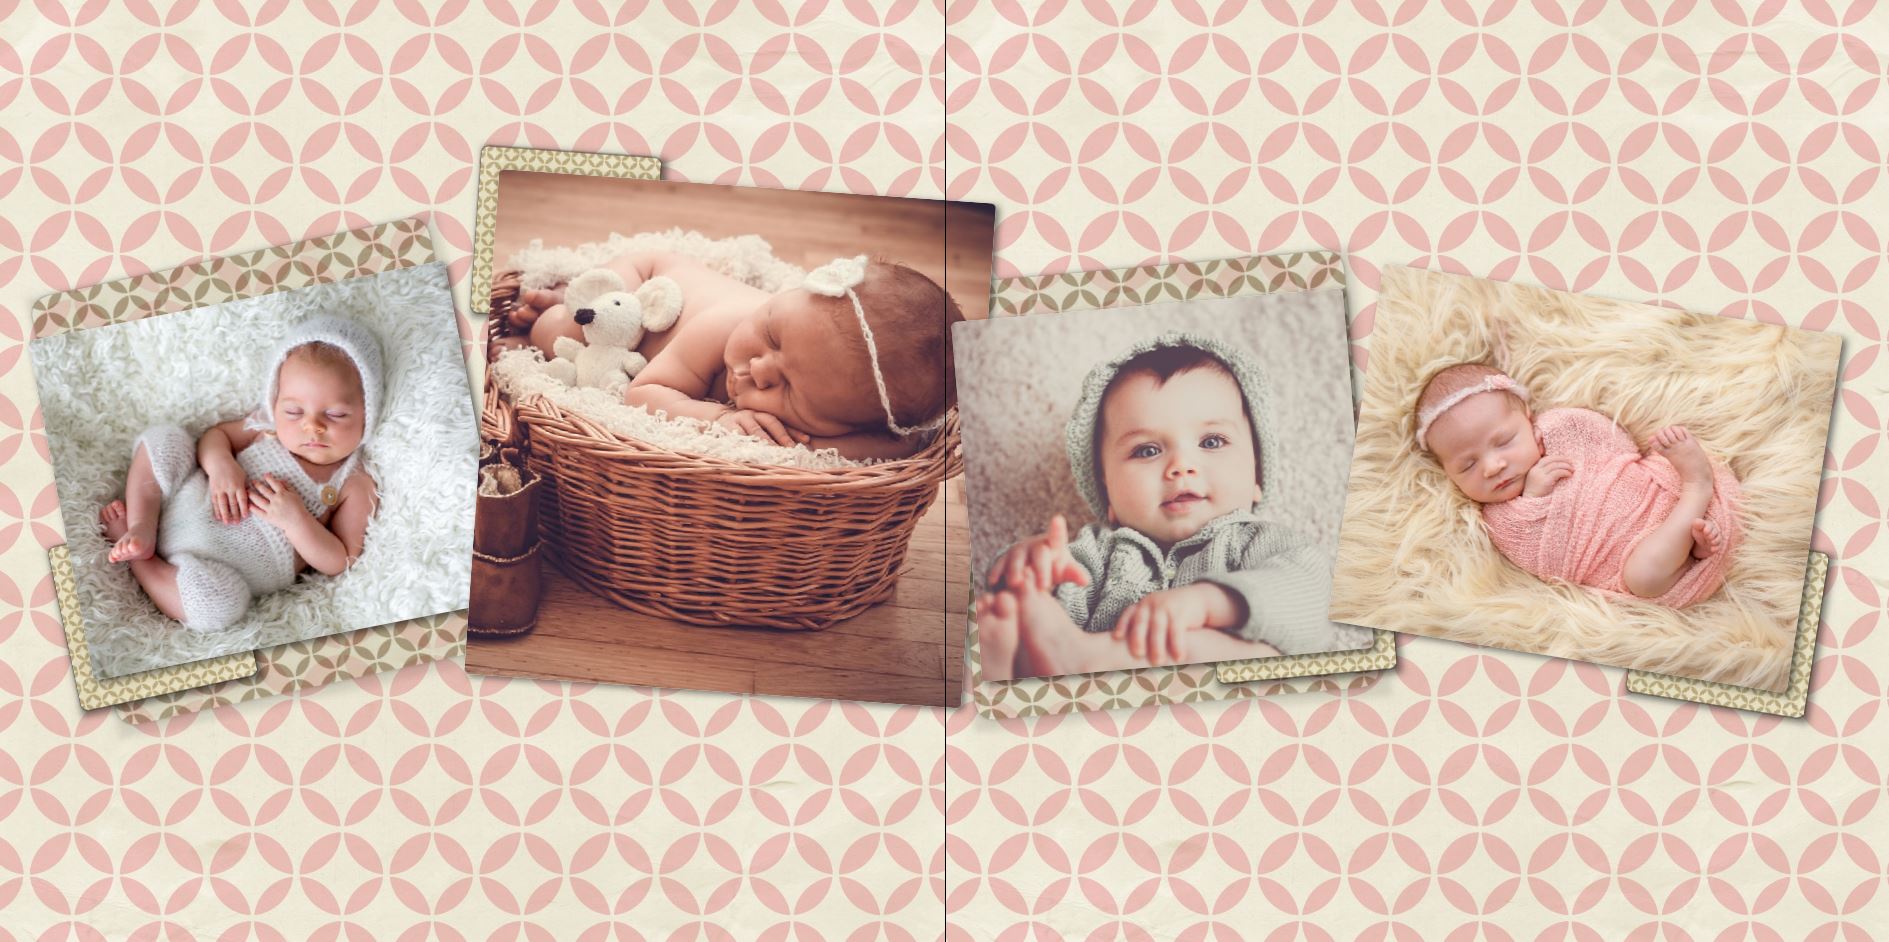 Photo Book - Our Baby Girl square 6-7